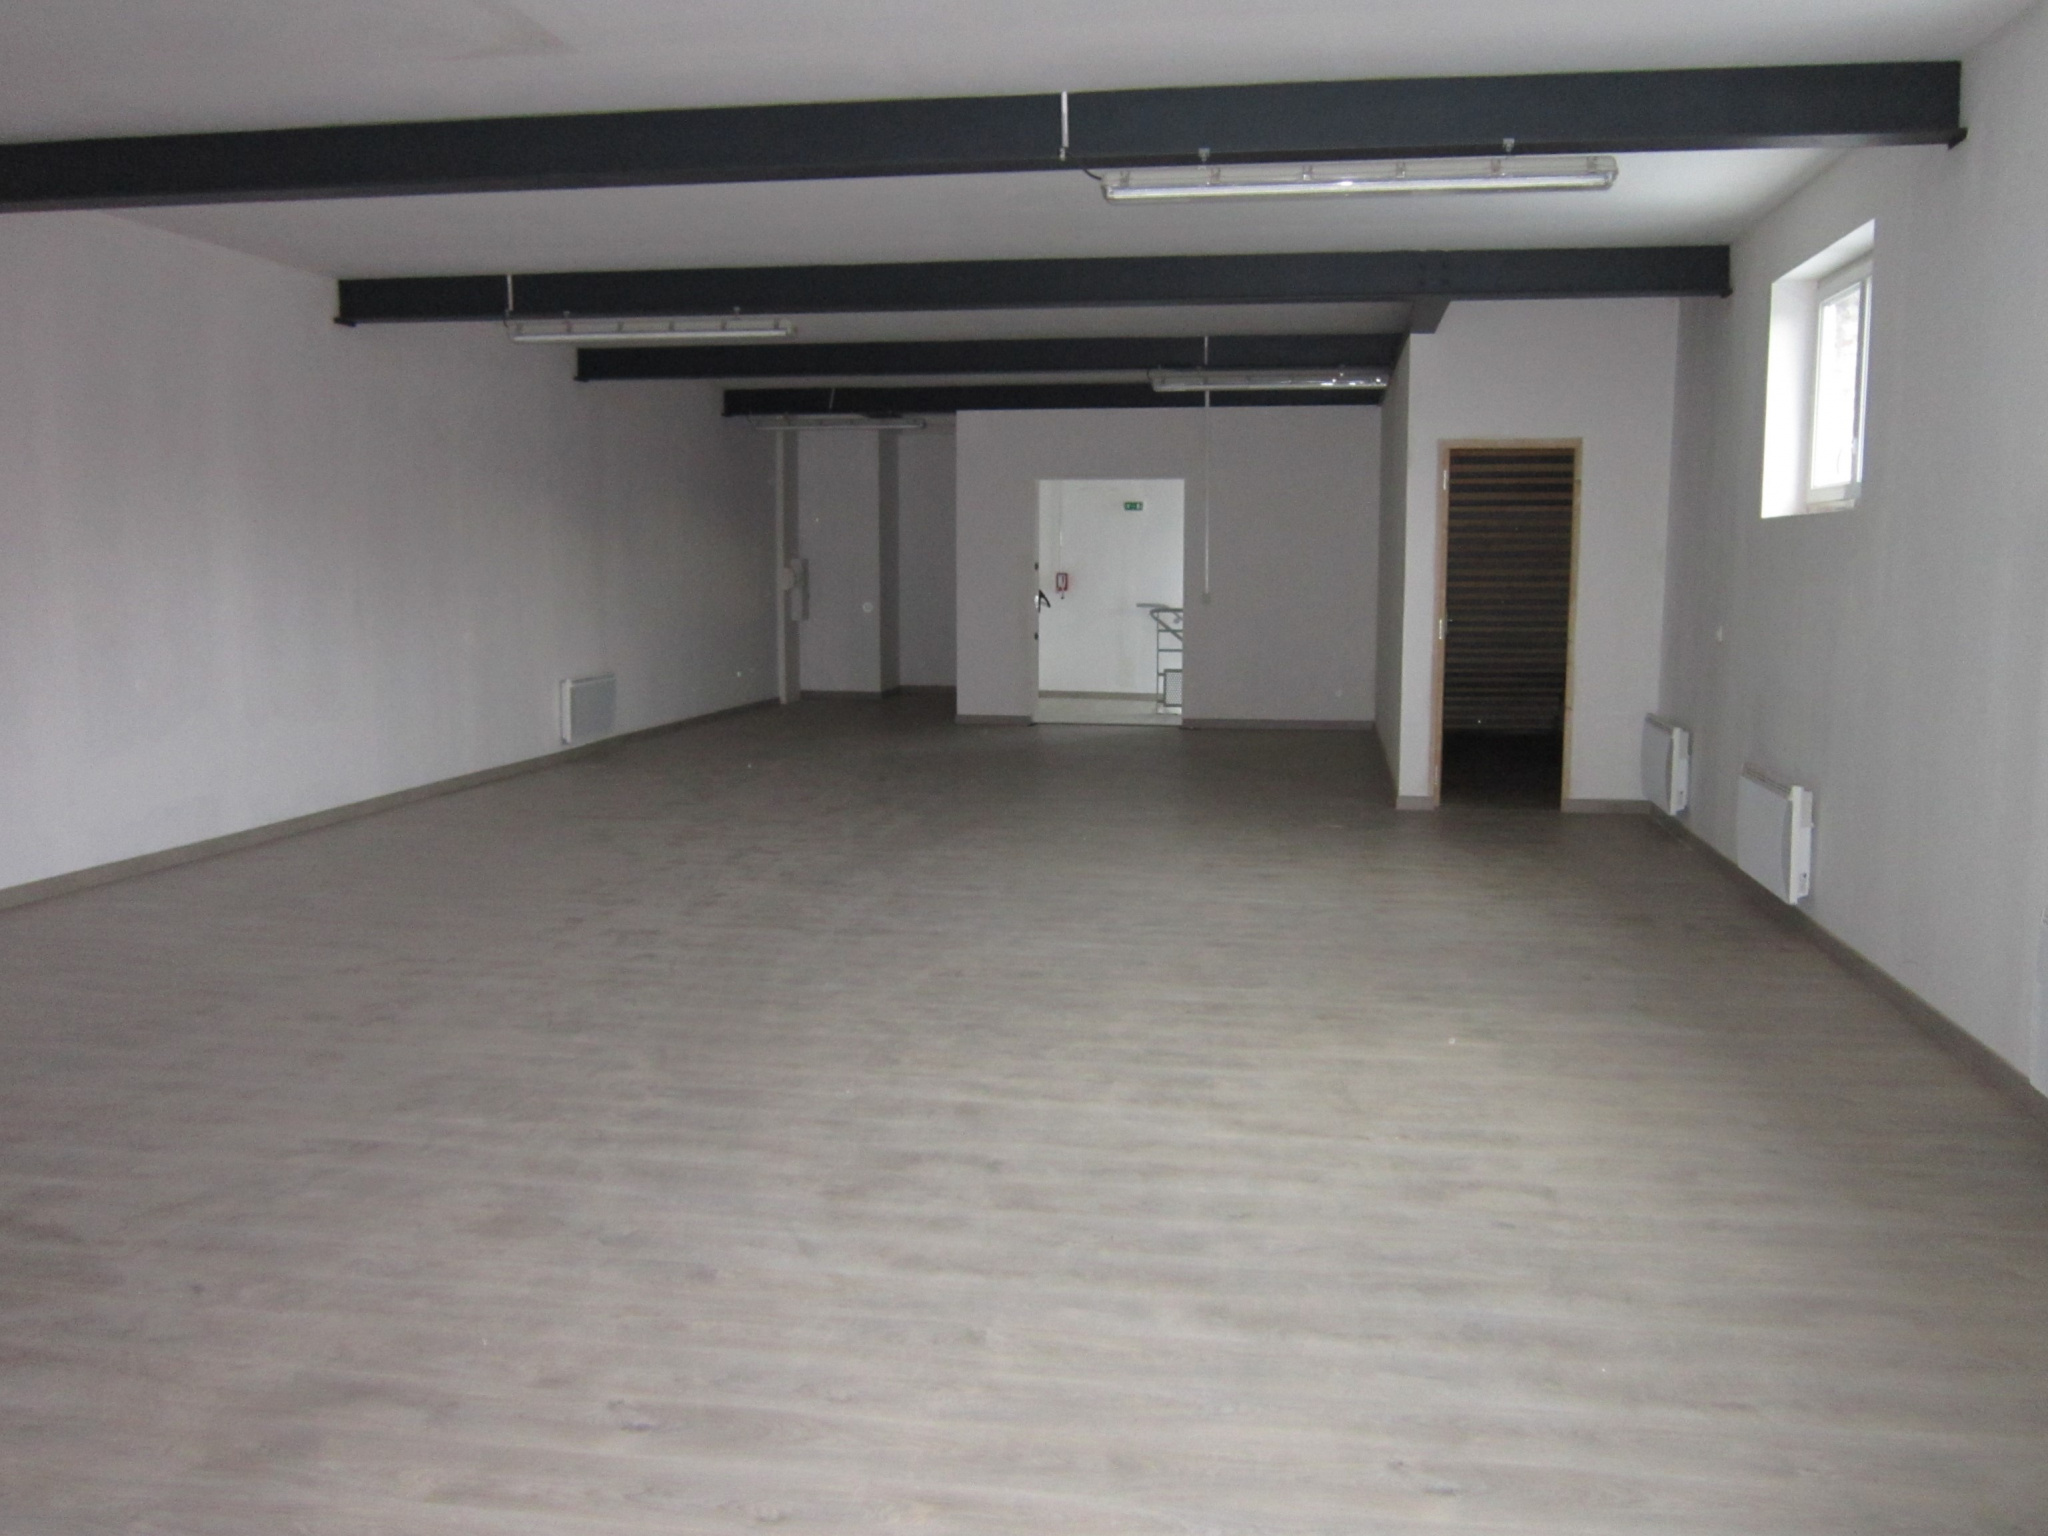 Local industriel  - 137m² - TOURCOING